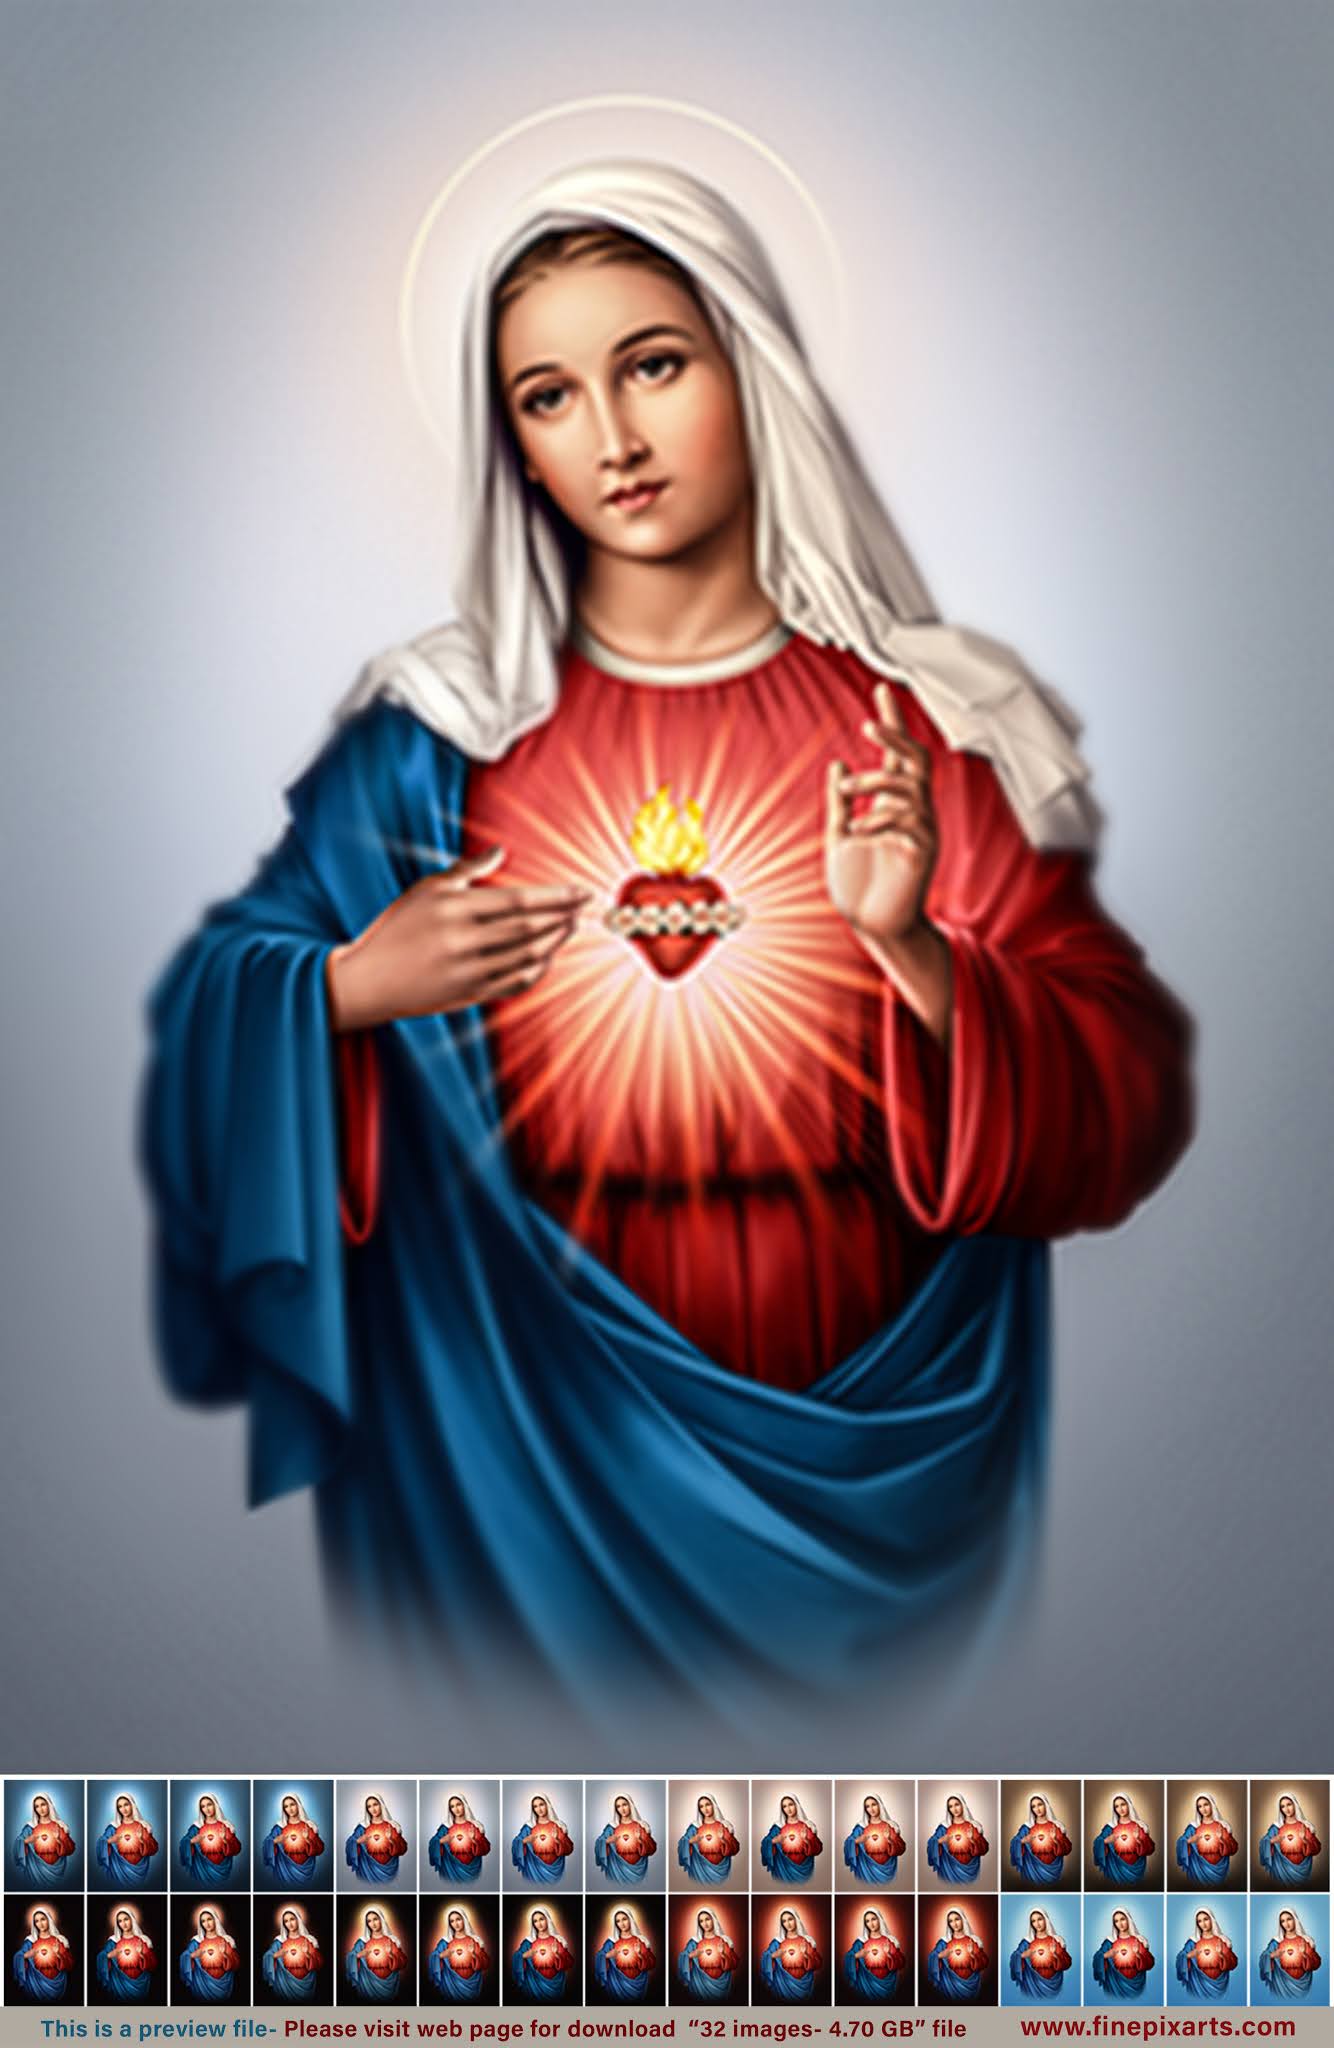 Immaculate Heart of Mary 8 Background- 4.72 GB